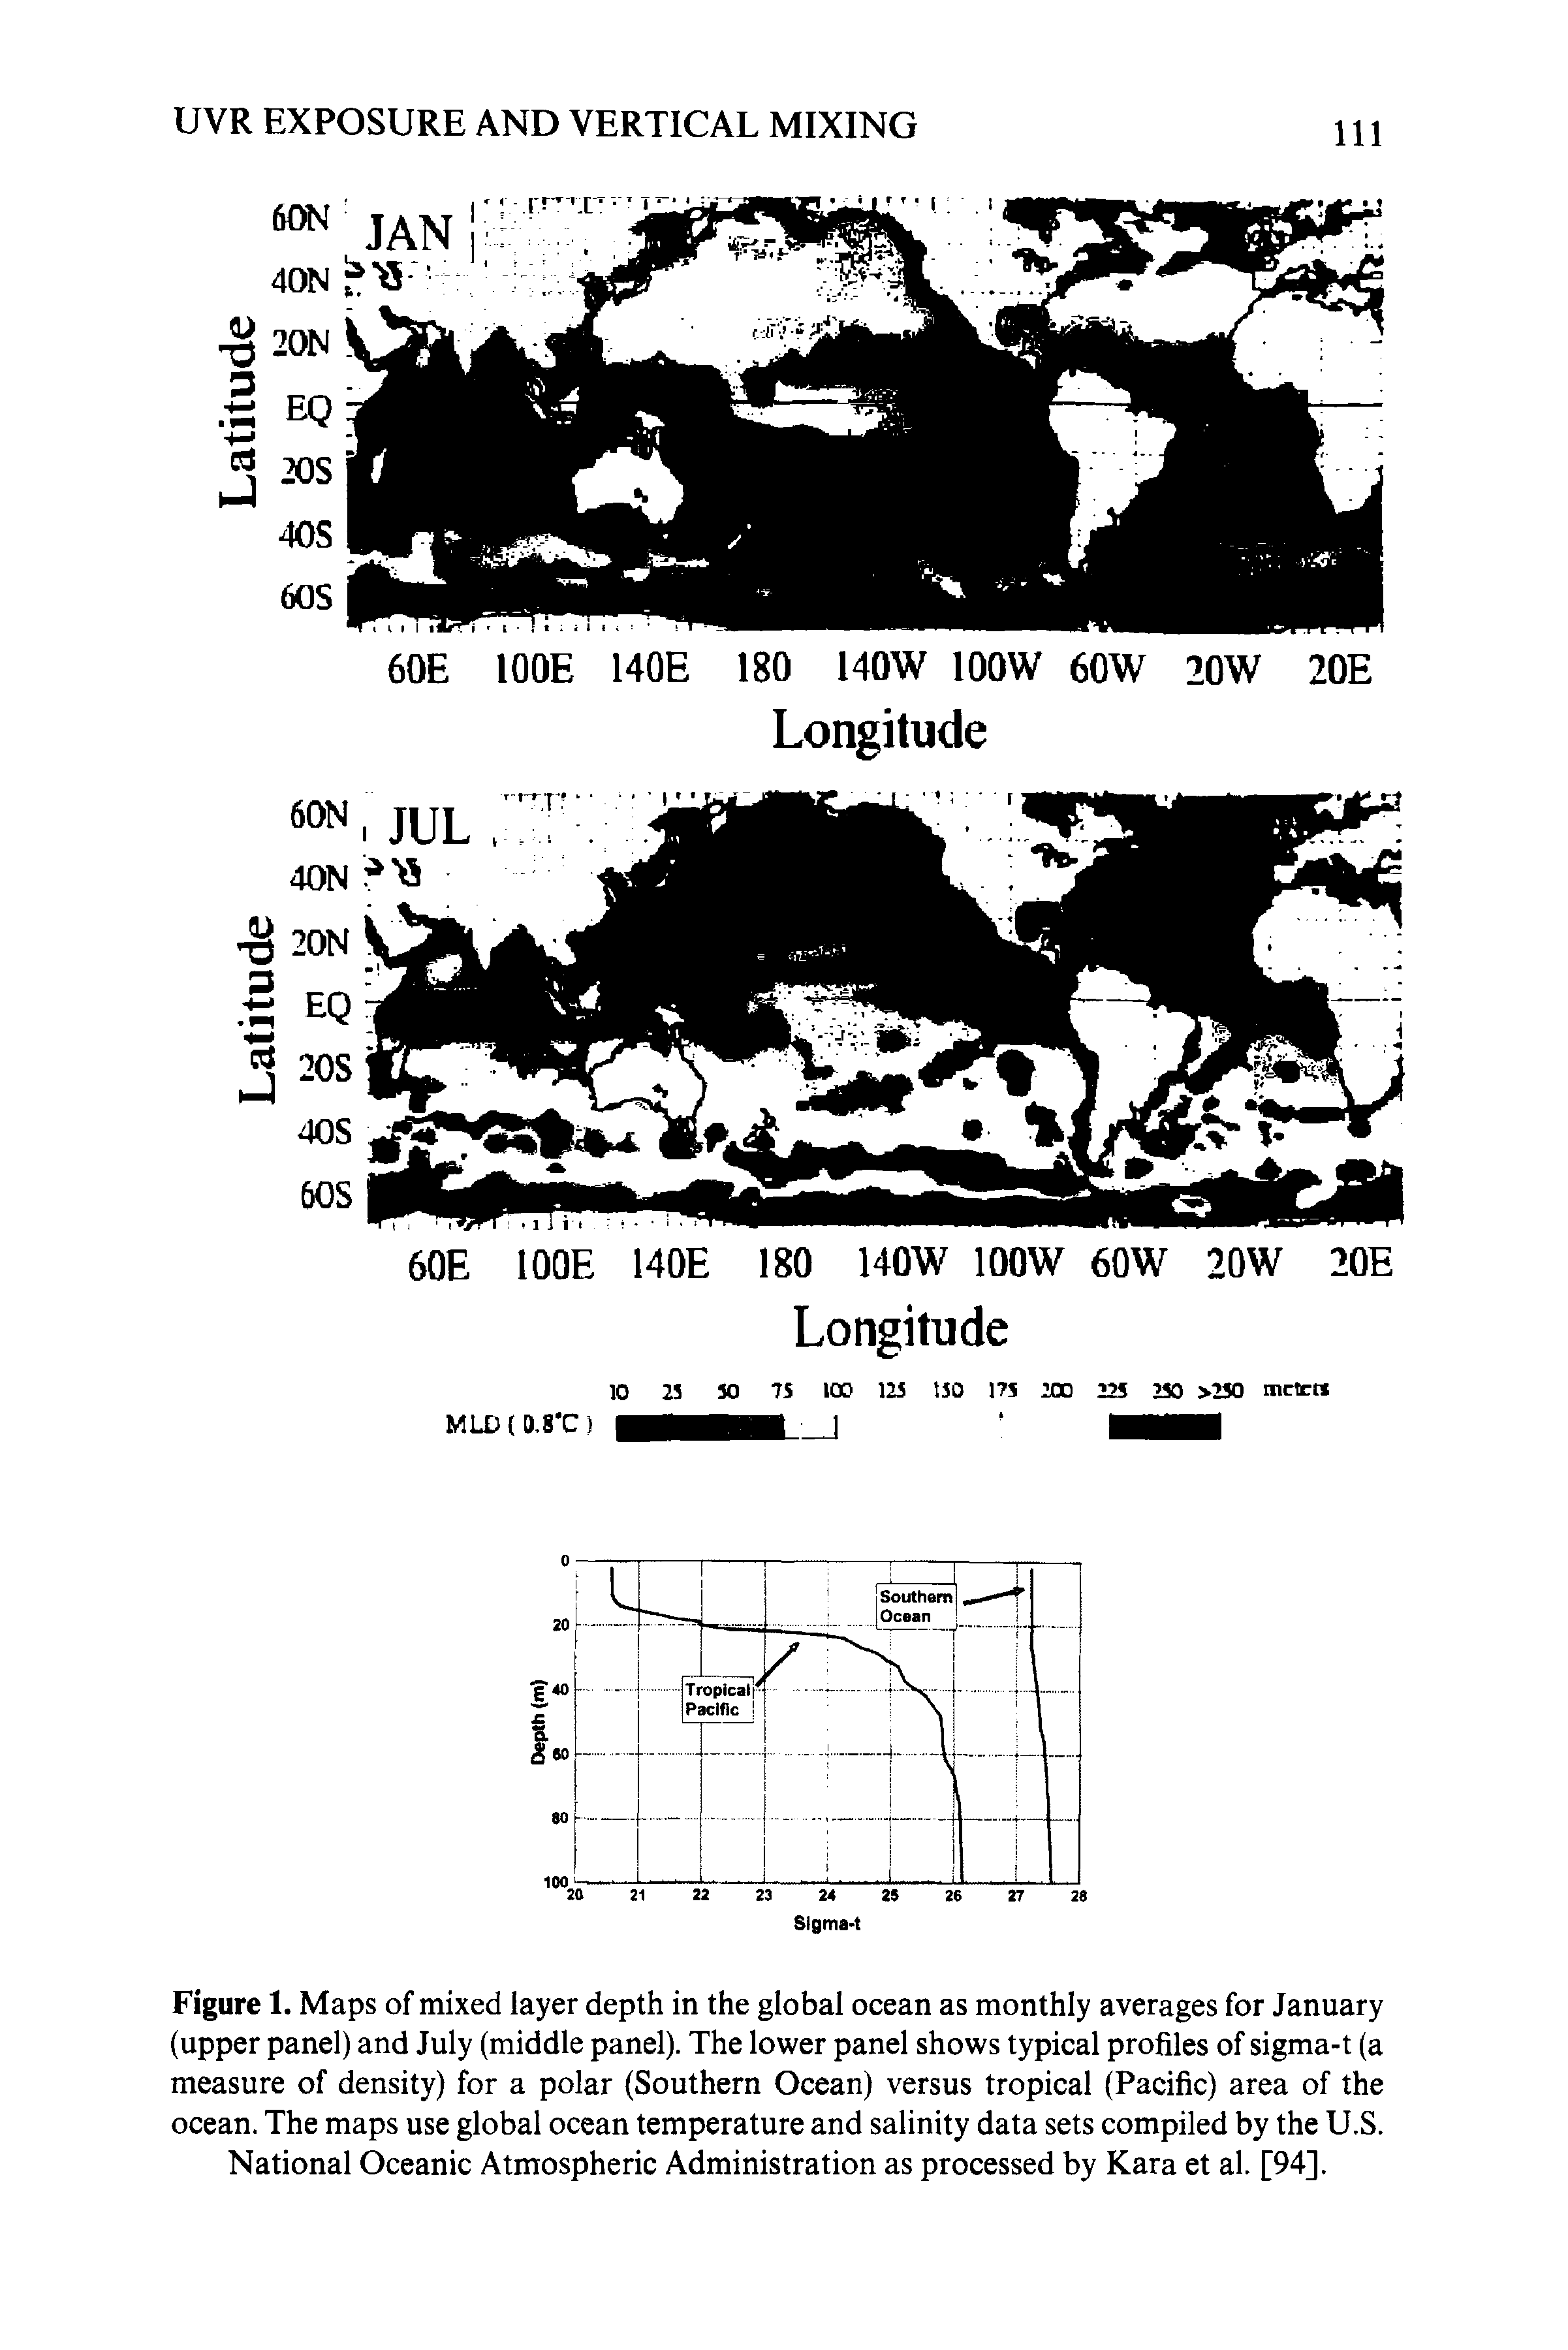 Figure 1. Maps of mixed layer depth in the global ocean as monthly averages for January (upper panel) and July (middle panel). The lower panel shows typical profiles of sigma-t (a measure of density) for a polar (Southern Ocean) versus tropical (Pacific) area of the ocean. The maps use global ocean temperature and salinity data sets compiled by the U.S. National Oceanic Atmospheric Administration as processed by Kara et al. [94].